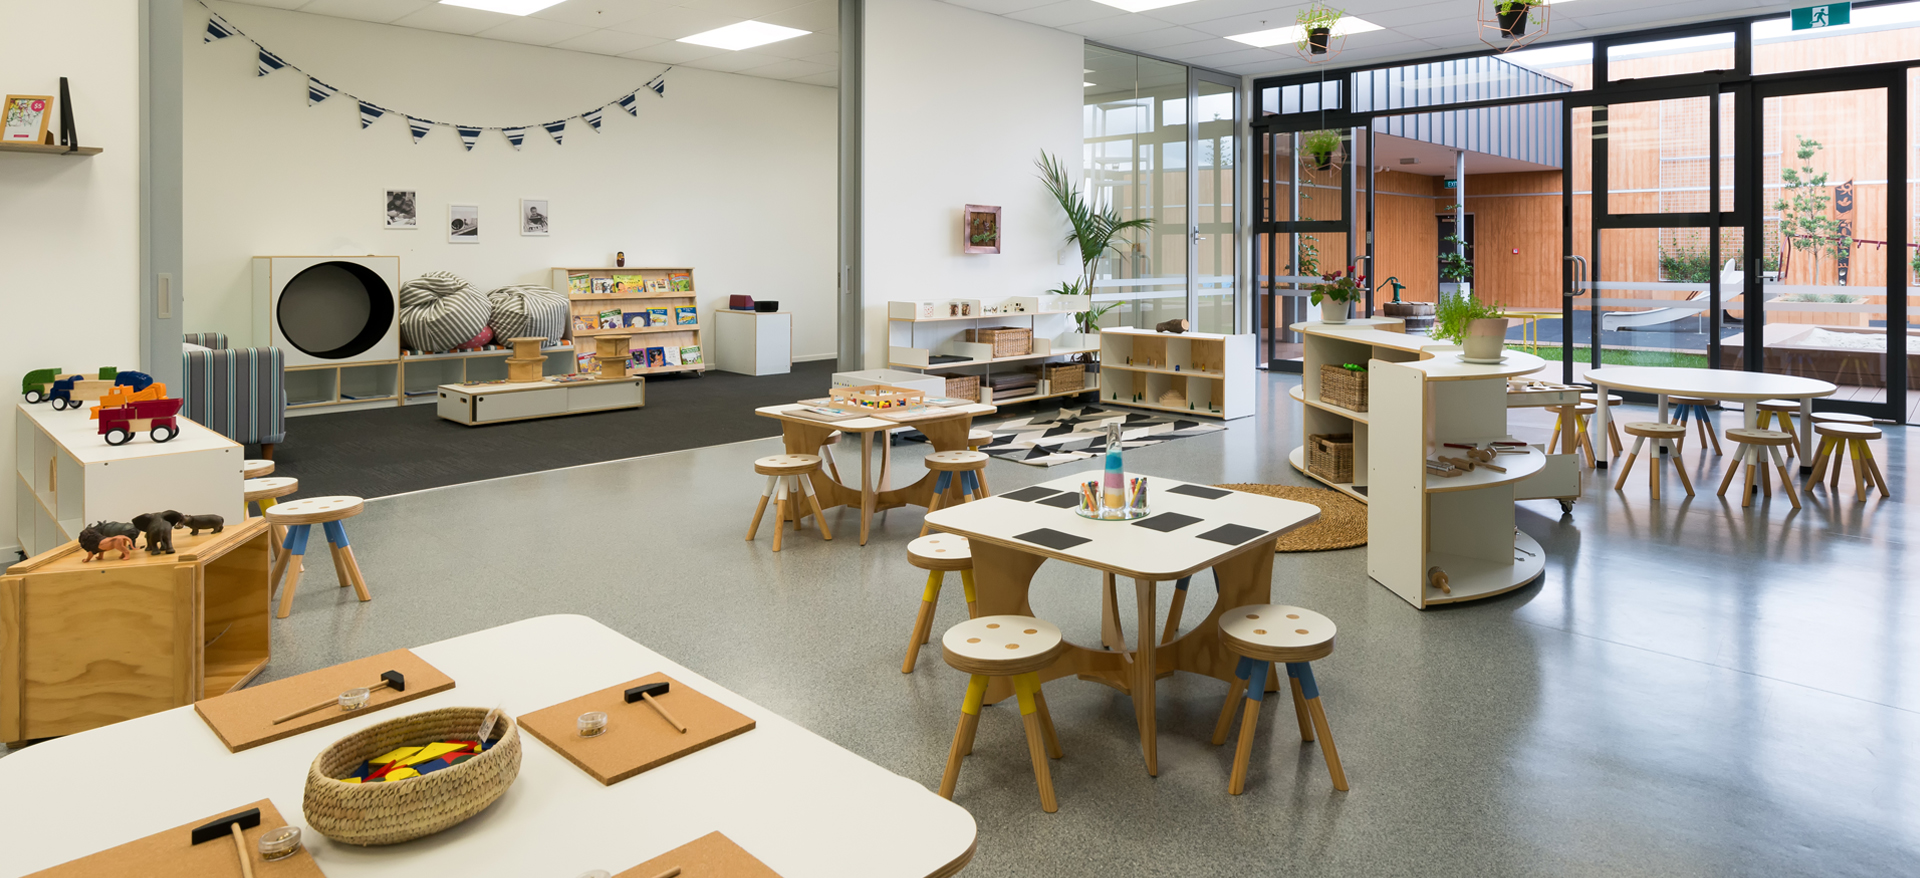 Co Kids Early Learning Centre, Henderson